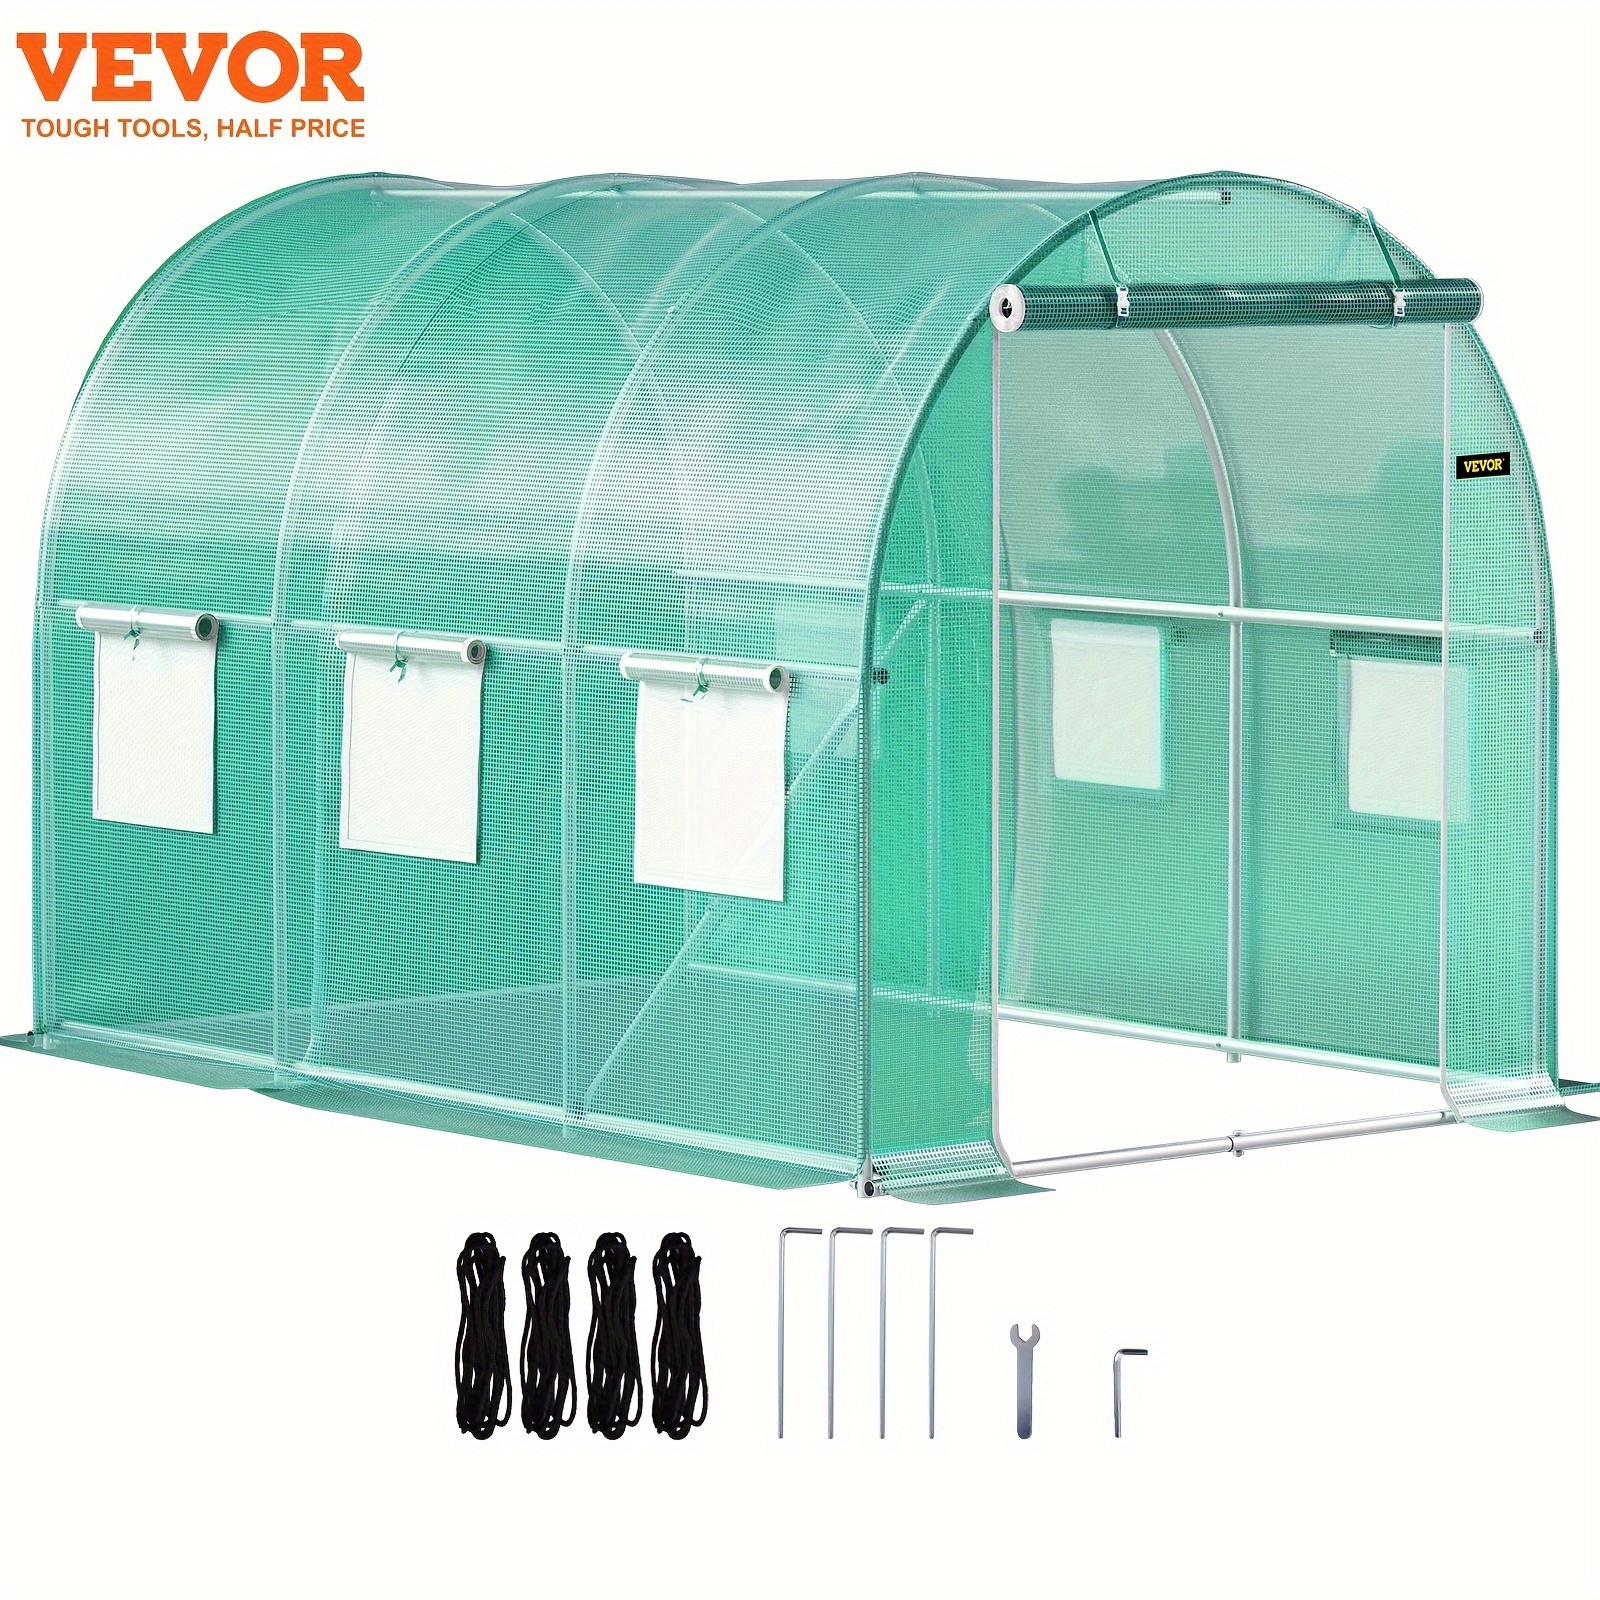 

Walk-in Tunnel Greenhouse, 10 X 7 X 7 Ft Portable Plant Hot House W/ Galvanized Steel Hoops, 1 Top Beam, Diagonal Poles, Zippered Door & 6 Roll-up Windows, Green